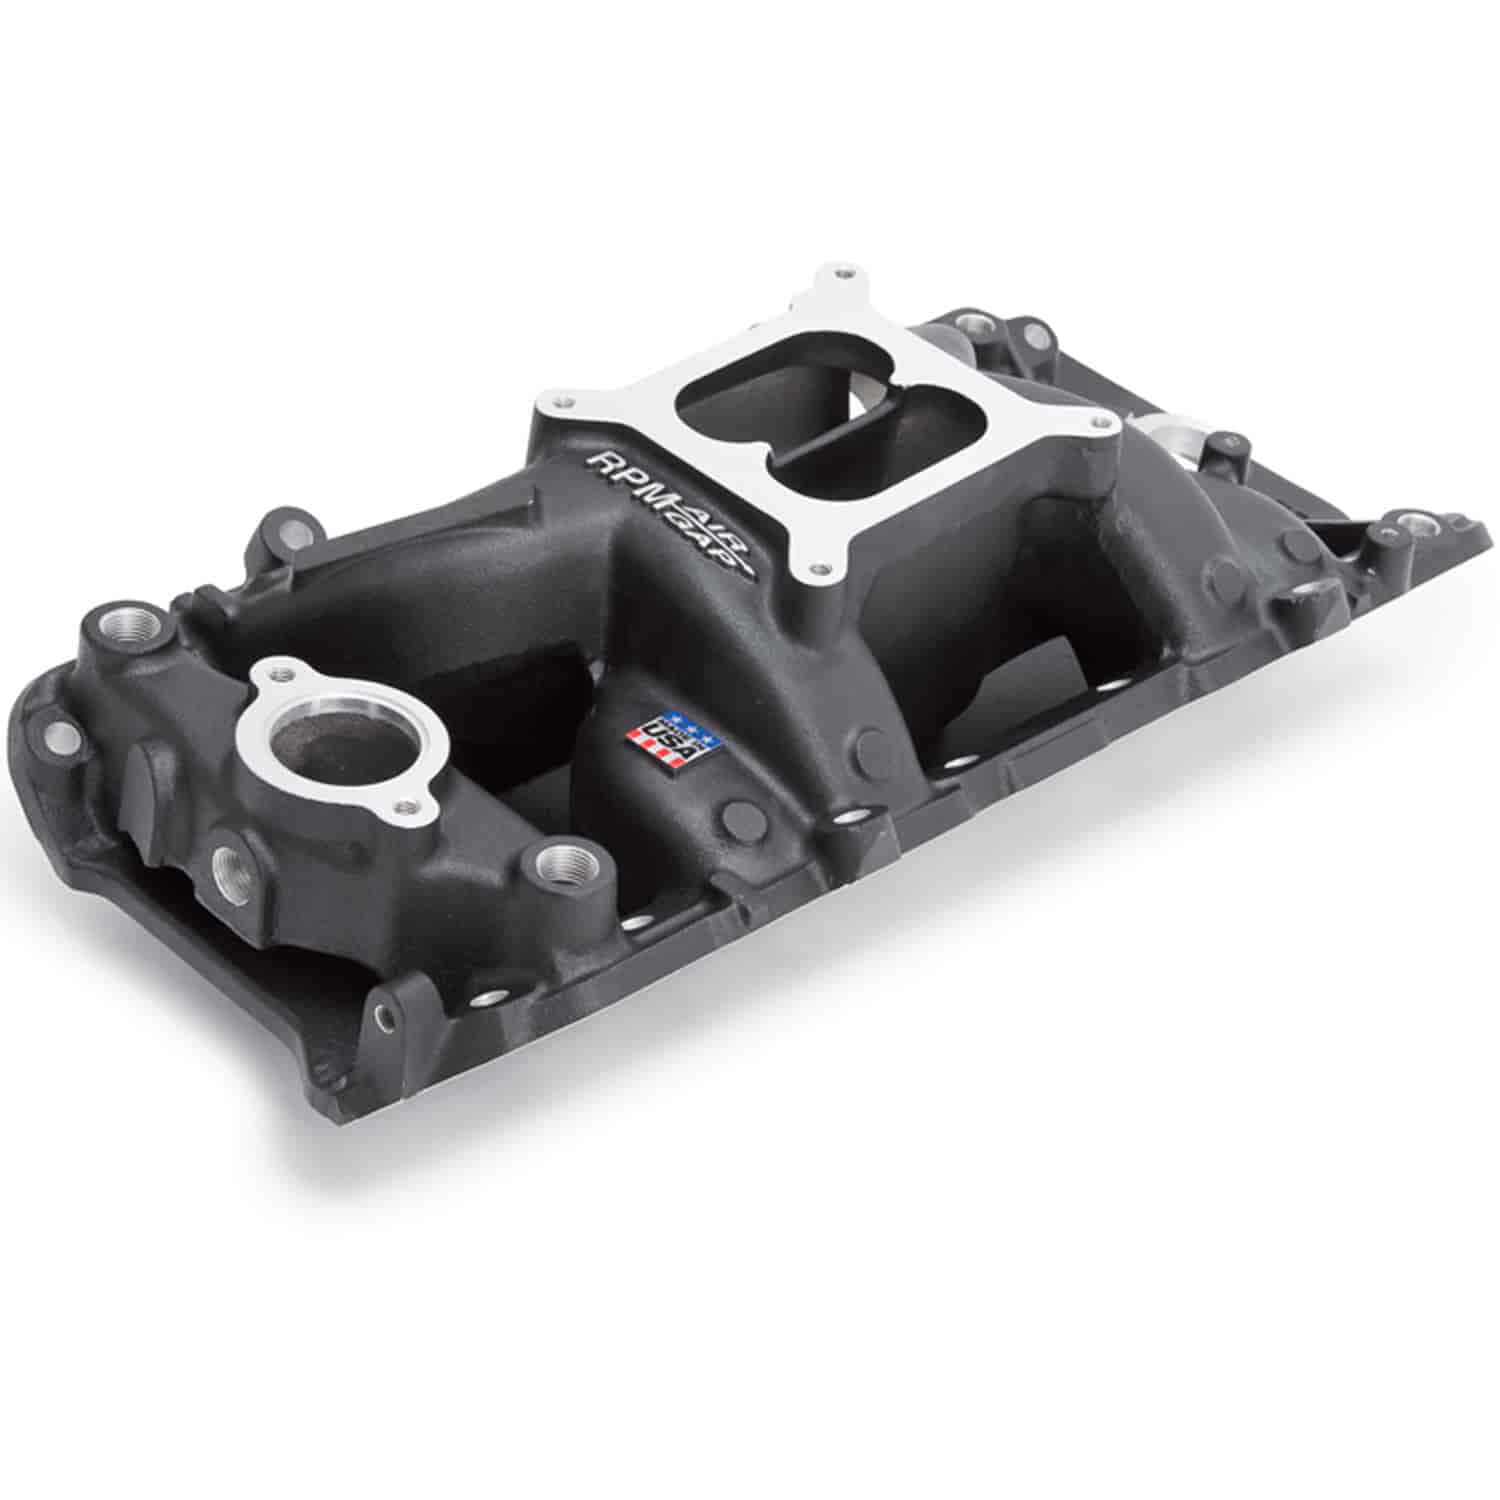 RPM Air-Gap 2-O Intake Manifold BB-Chevy 396-502 with oval port cylinder heads